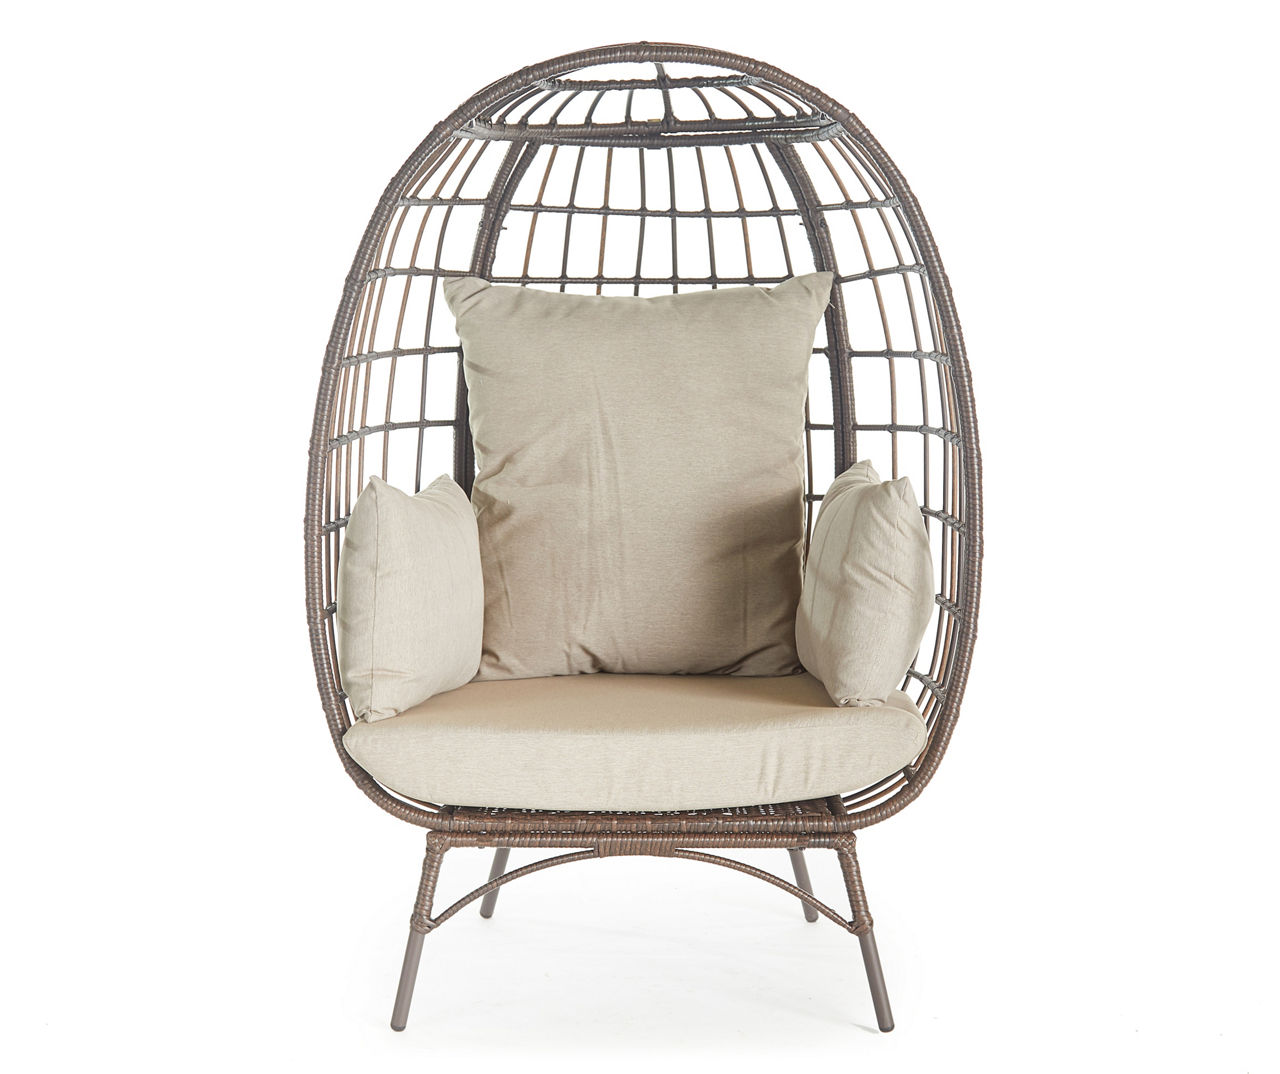 All-Weather Wicker Cushioned Patio Egg Cuddle Chair | Big Lots